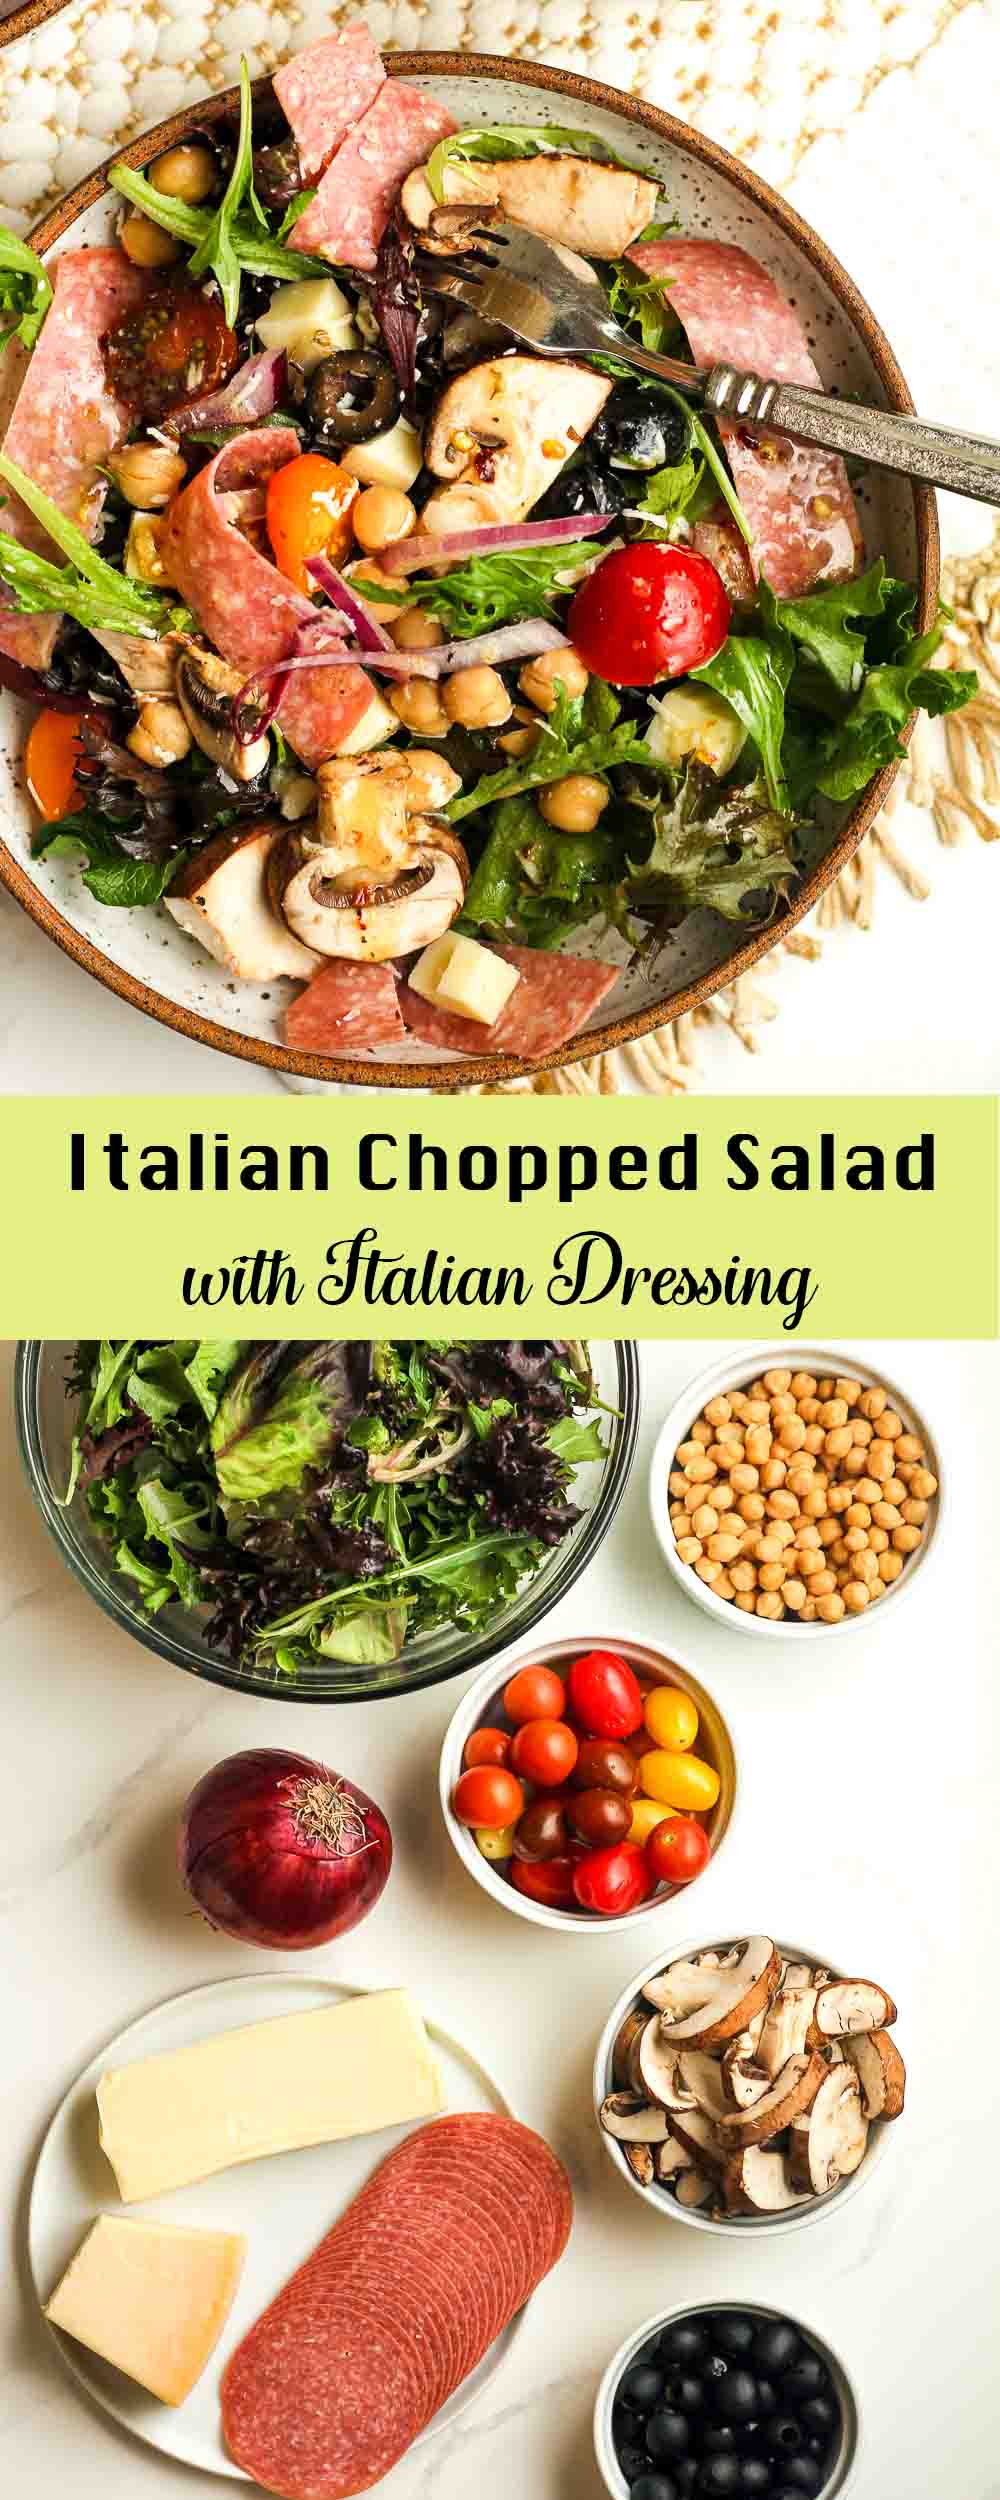 A collage of photos for Italian Chopped Salad with Italian Dressing.